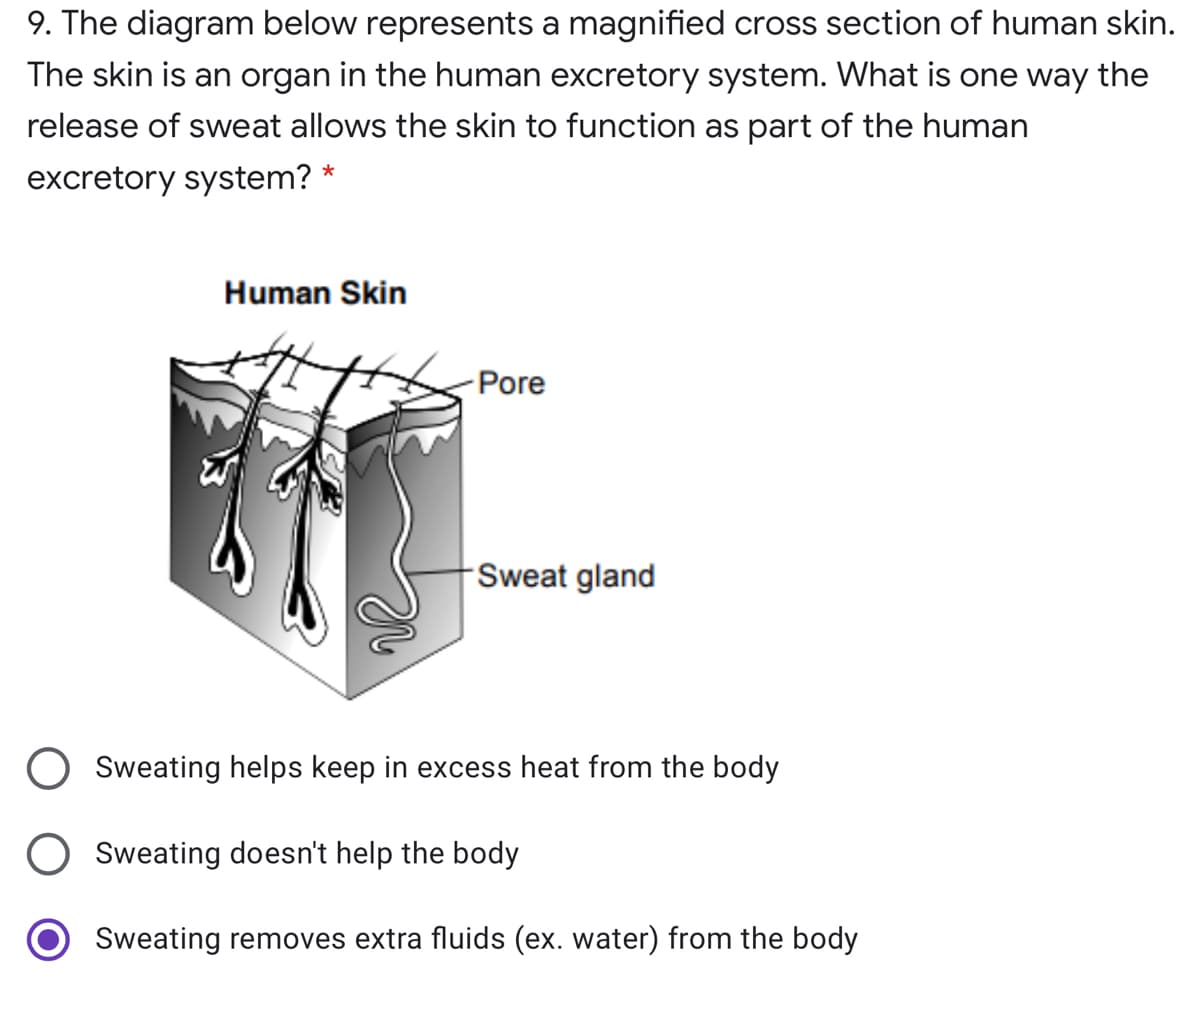 9. The diagram below represents a magnified cross section of human skin.
The skin is an organ in the human excretory system. What is one way the
release of sweat allows the skin to function as part of the human
excretory system? *
Human Skin
Pore
Sweat gland
Sweating helps keep in excess heat from the body
O Sweating doesn't help the body
Sweating removes extra fluids (ex. water) from the body
